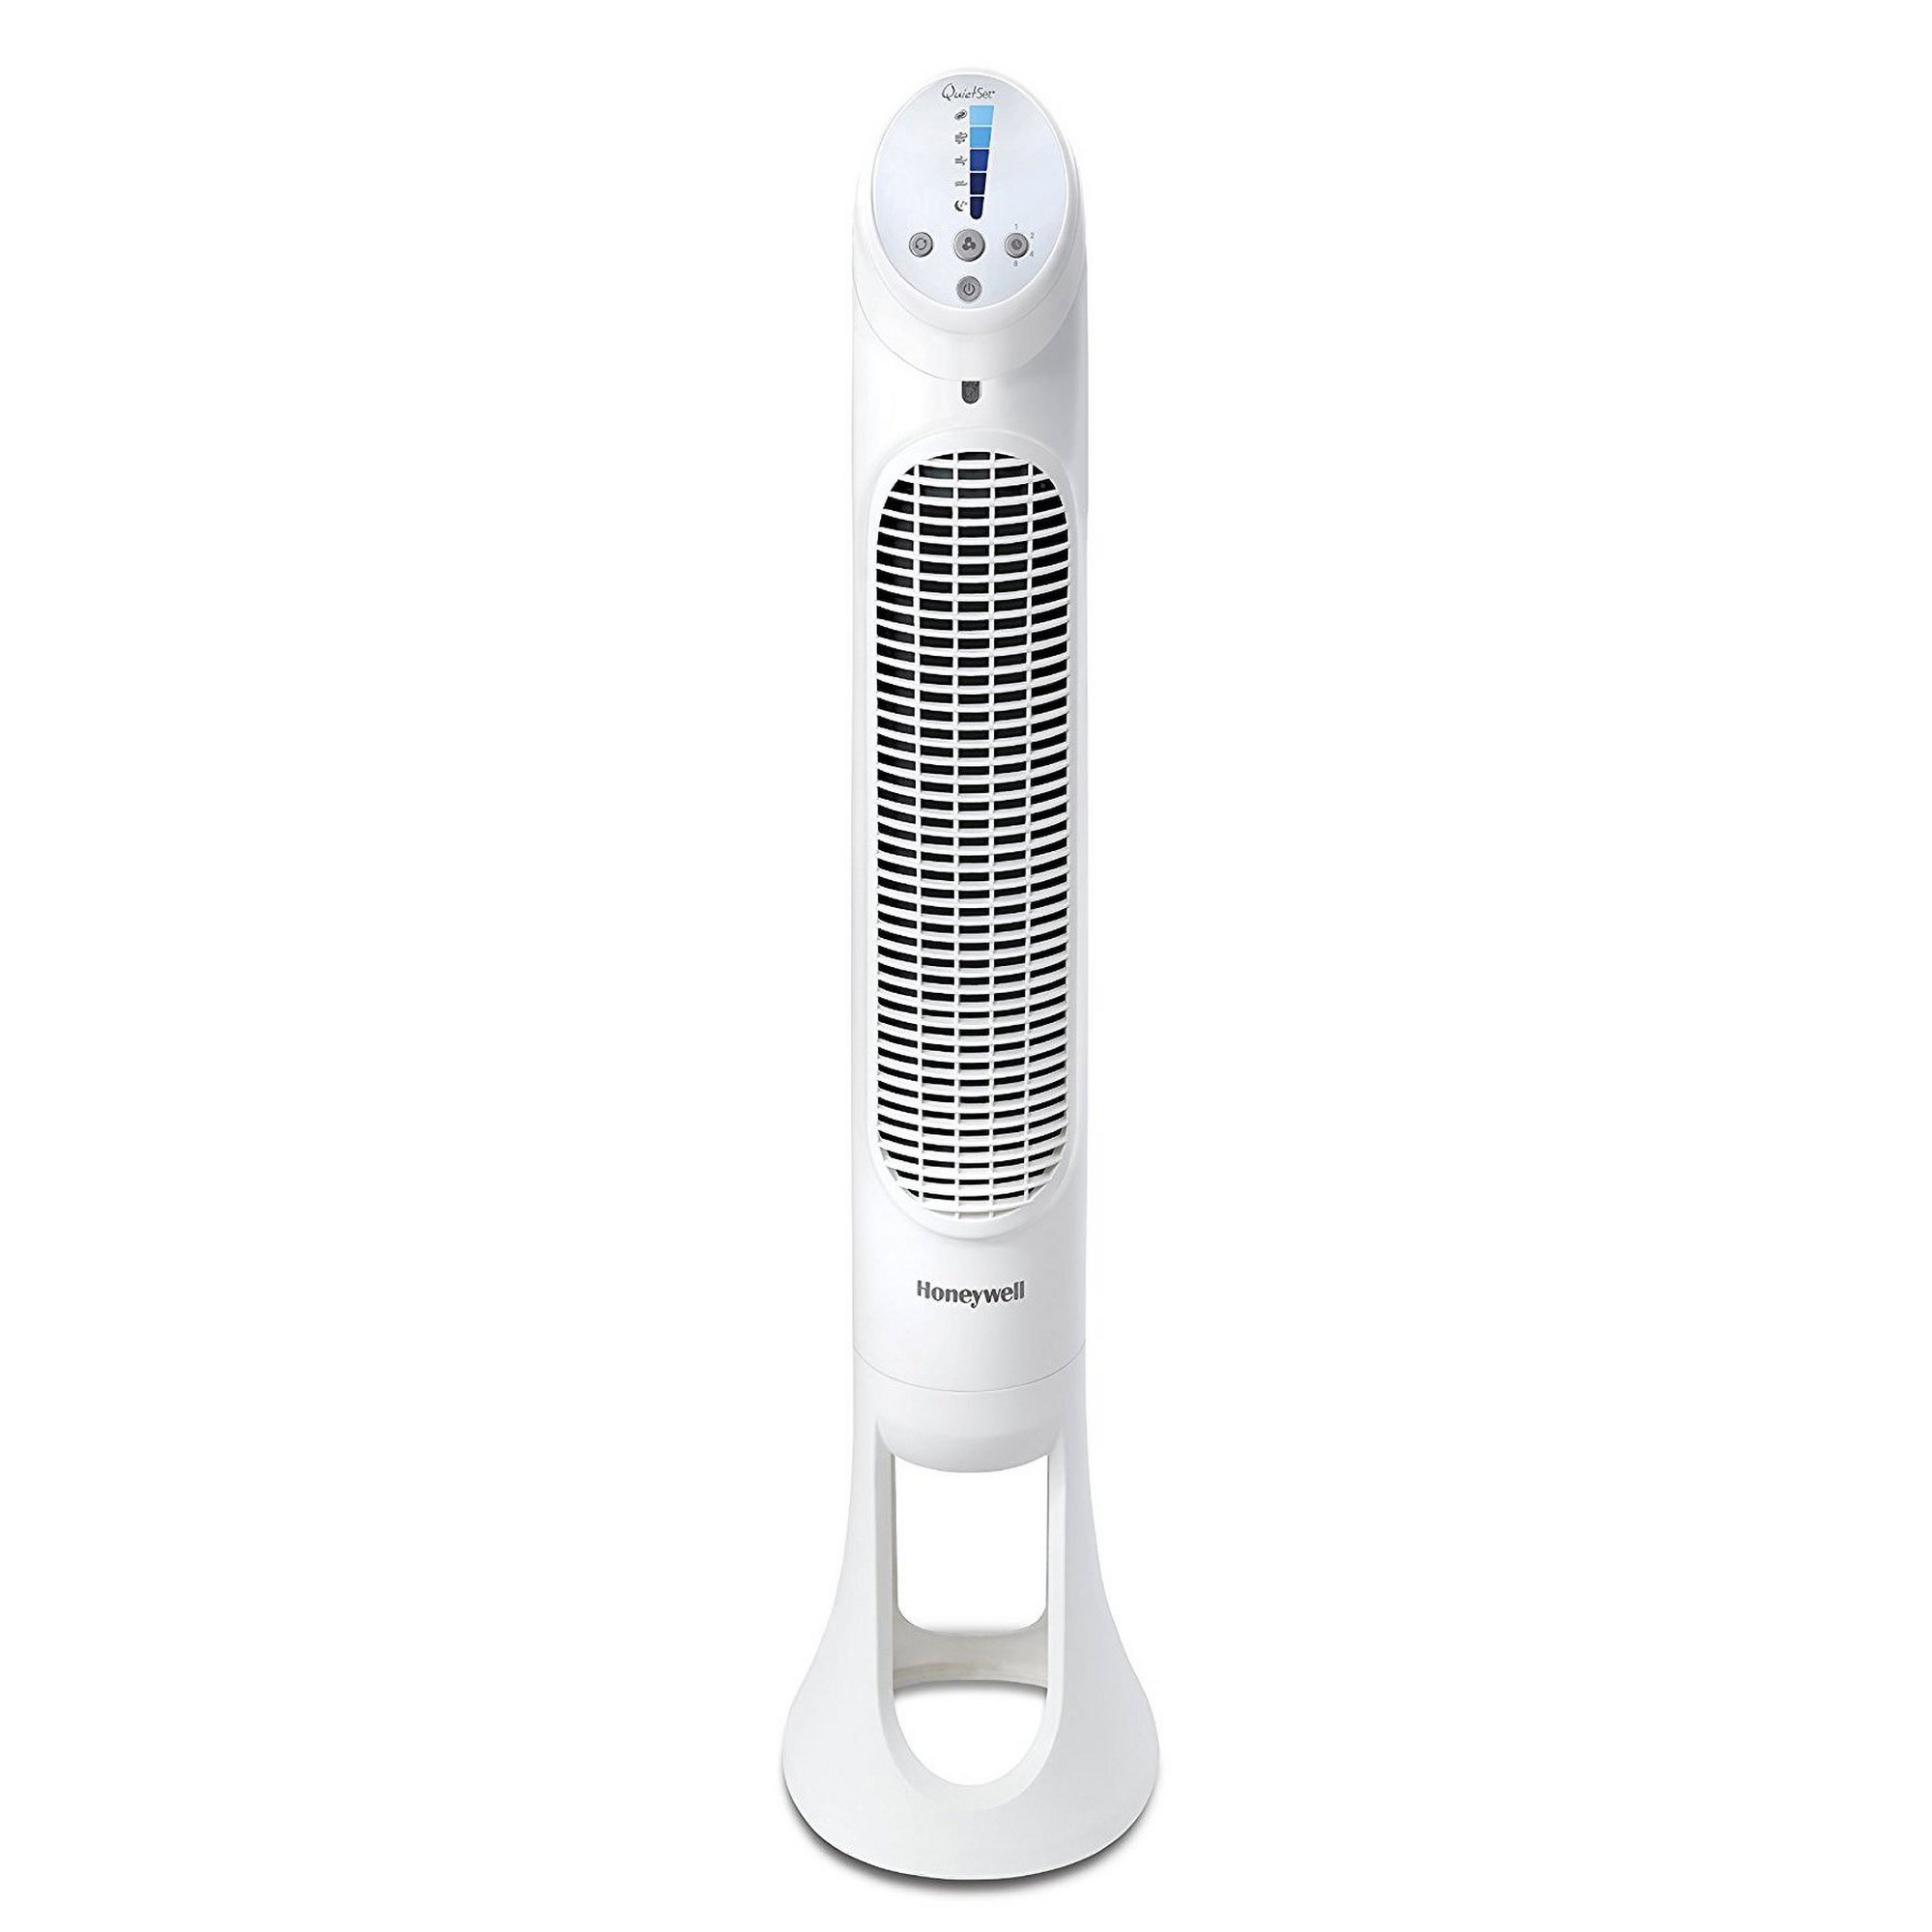 Honeywell QuietSet Tower Fan with Remote Control